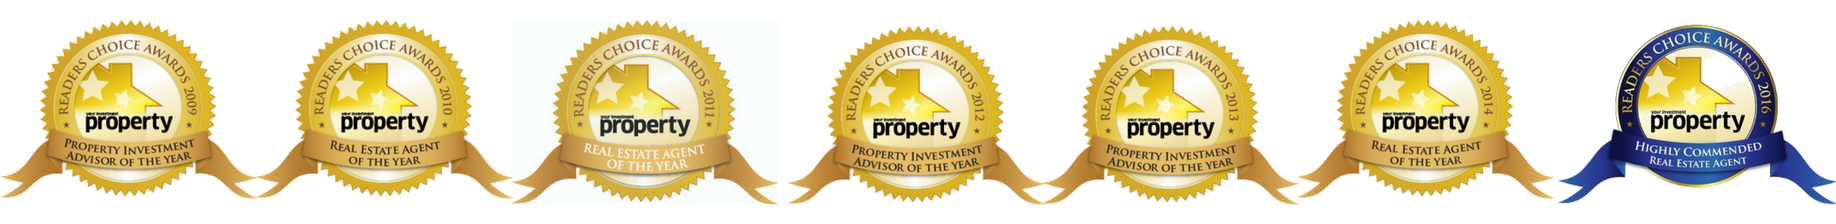 YIP Awards for Rocket Property Group